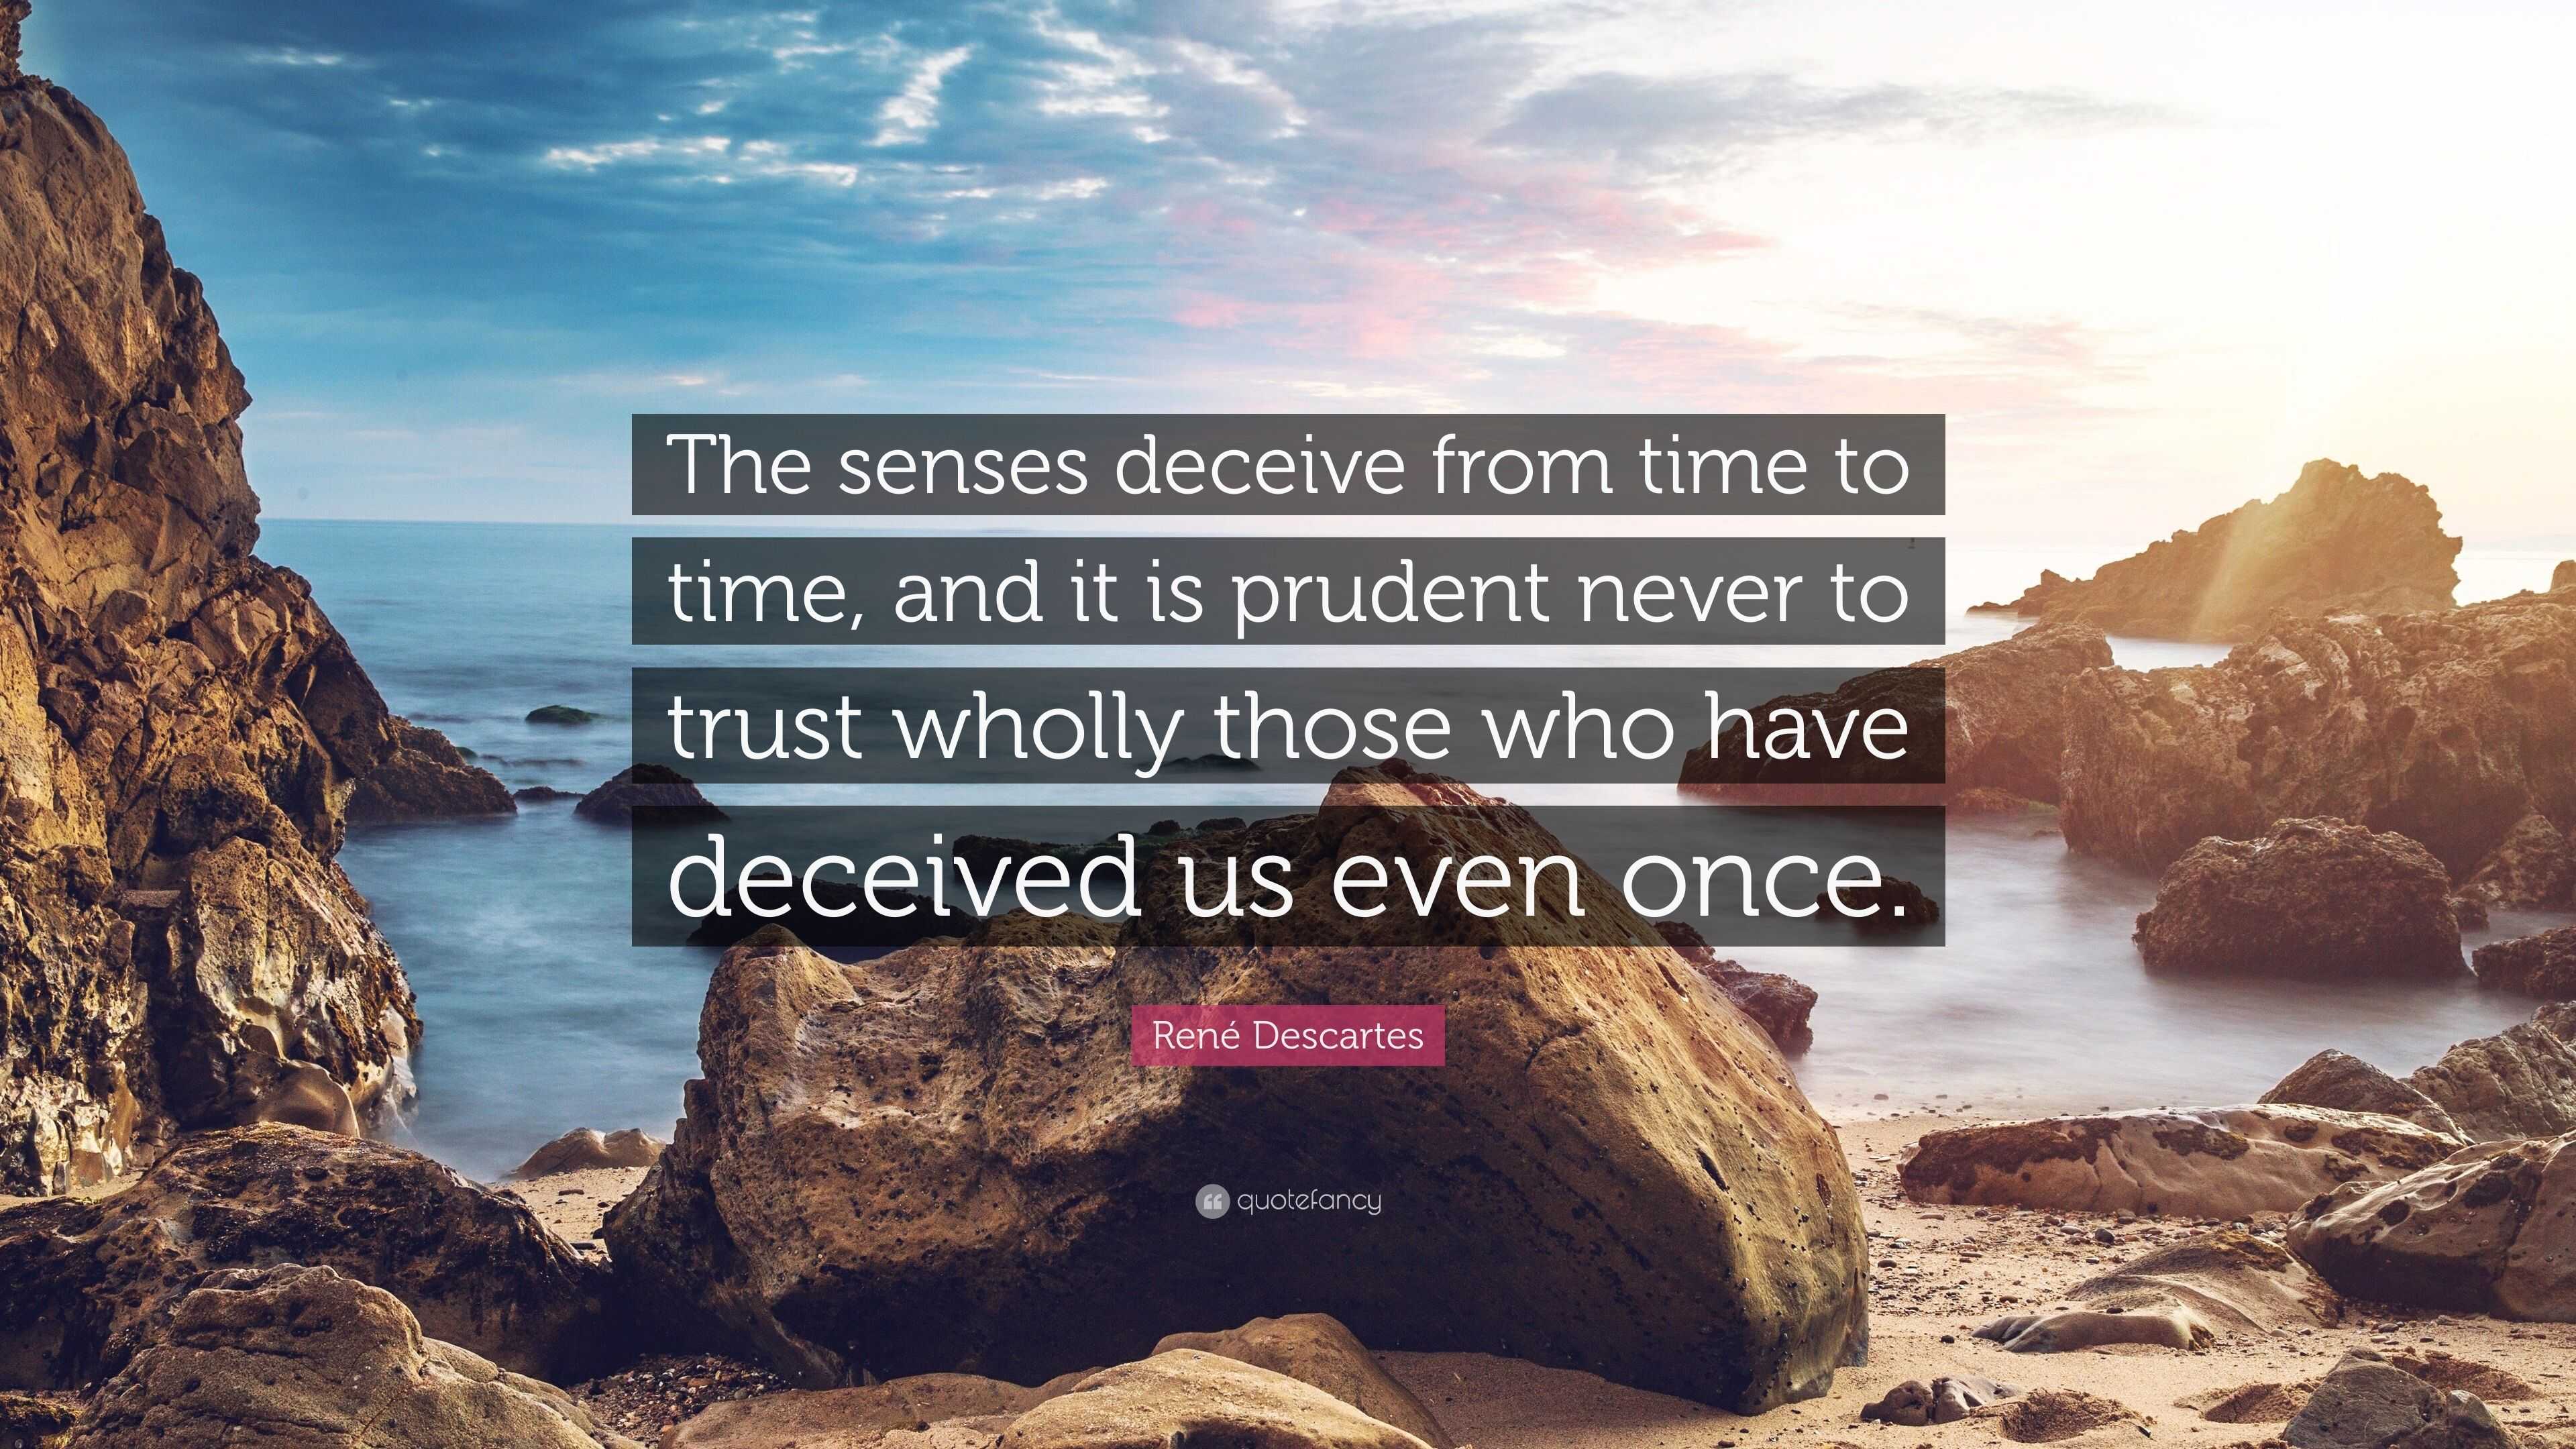 René Descartes Quote: “The senses deceive from time to time, and it is ...